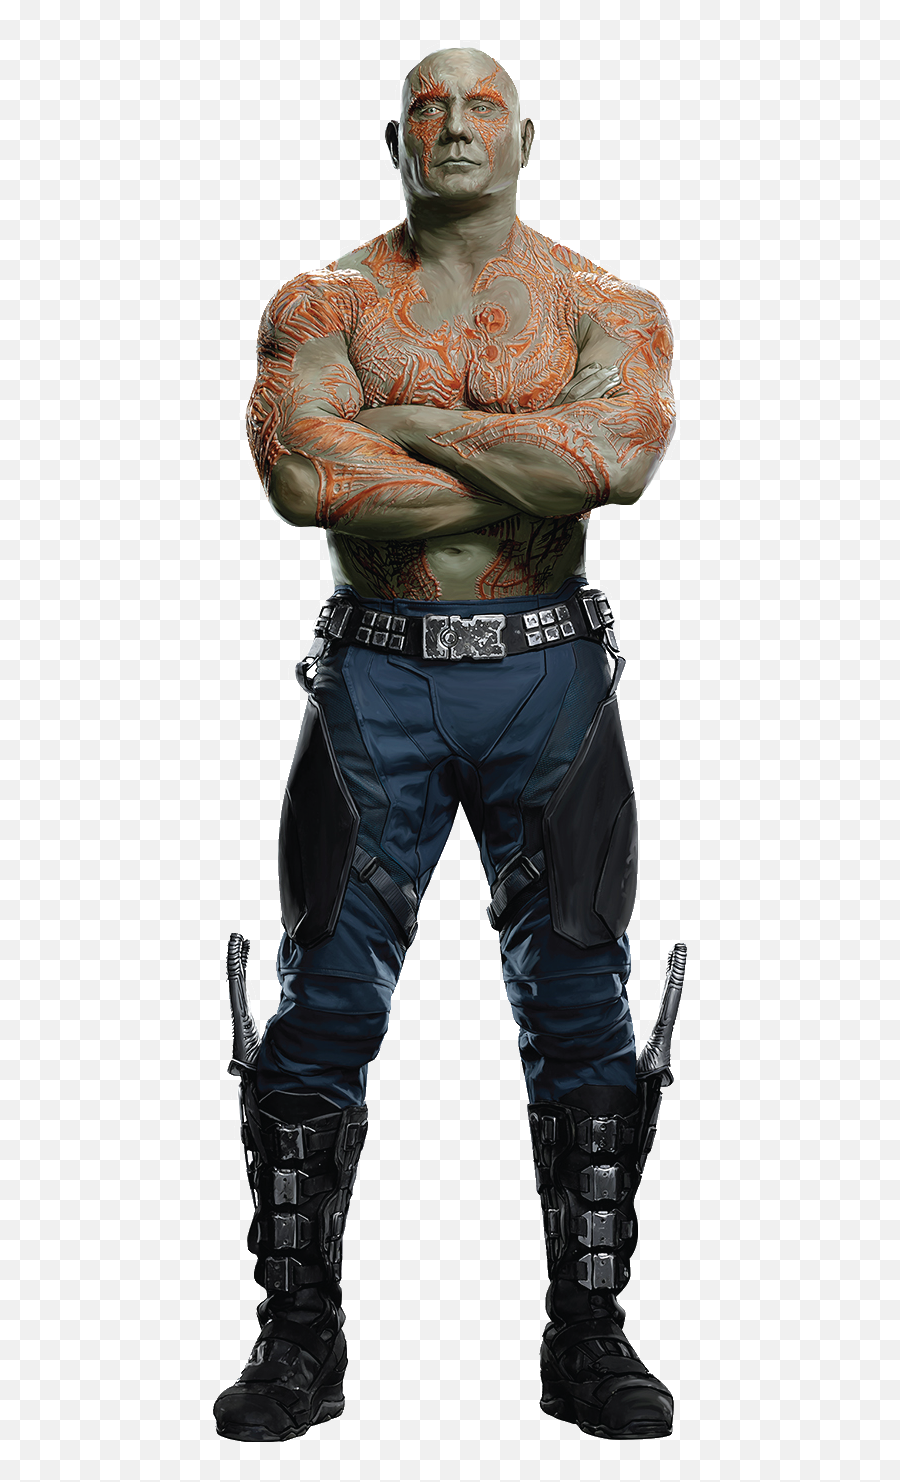 Download Free Png Drax The Destroyer - Guardians Of The Galaxy Drax,Drax Png